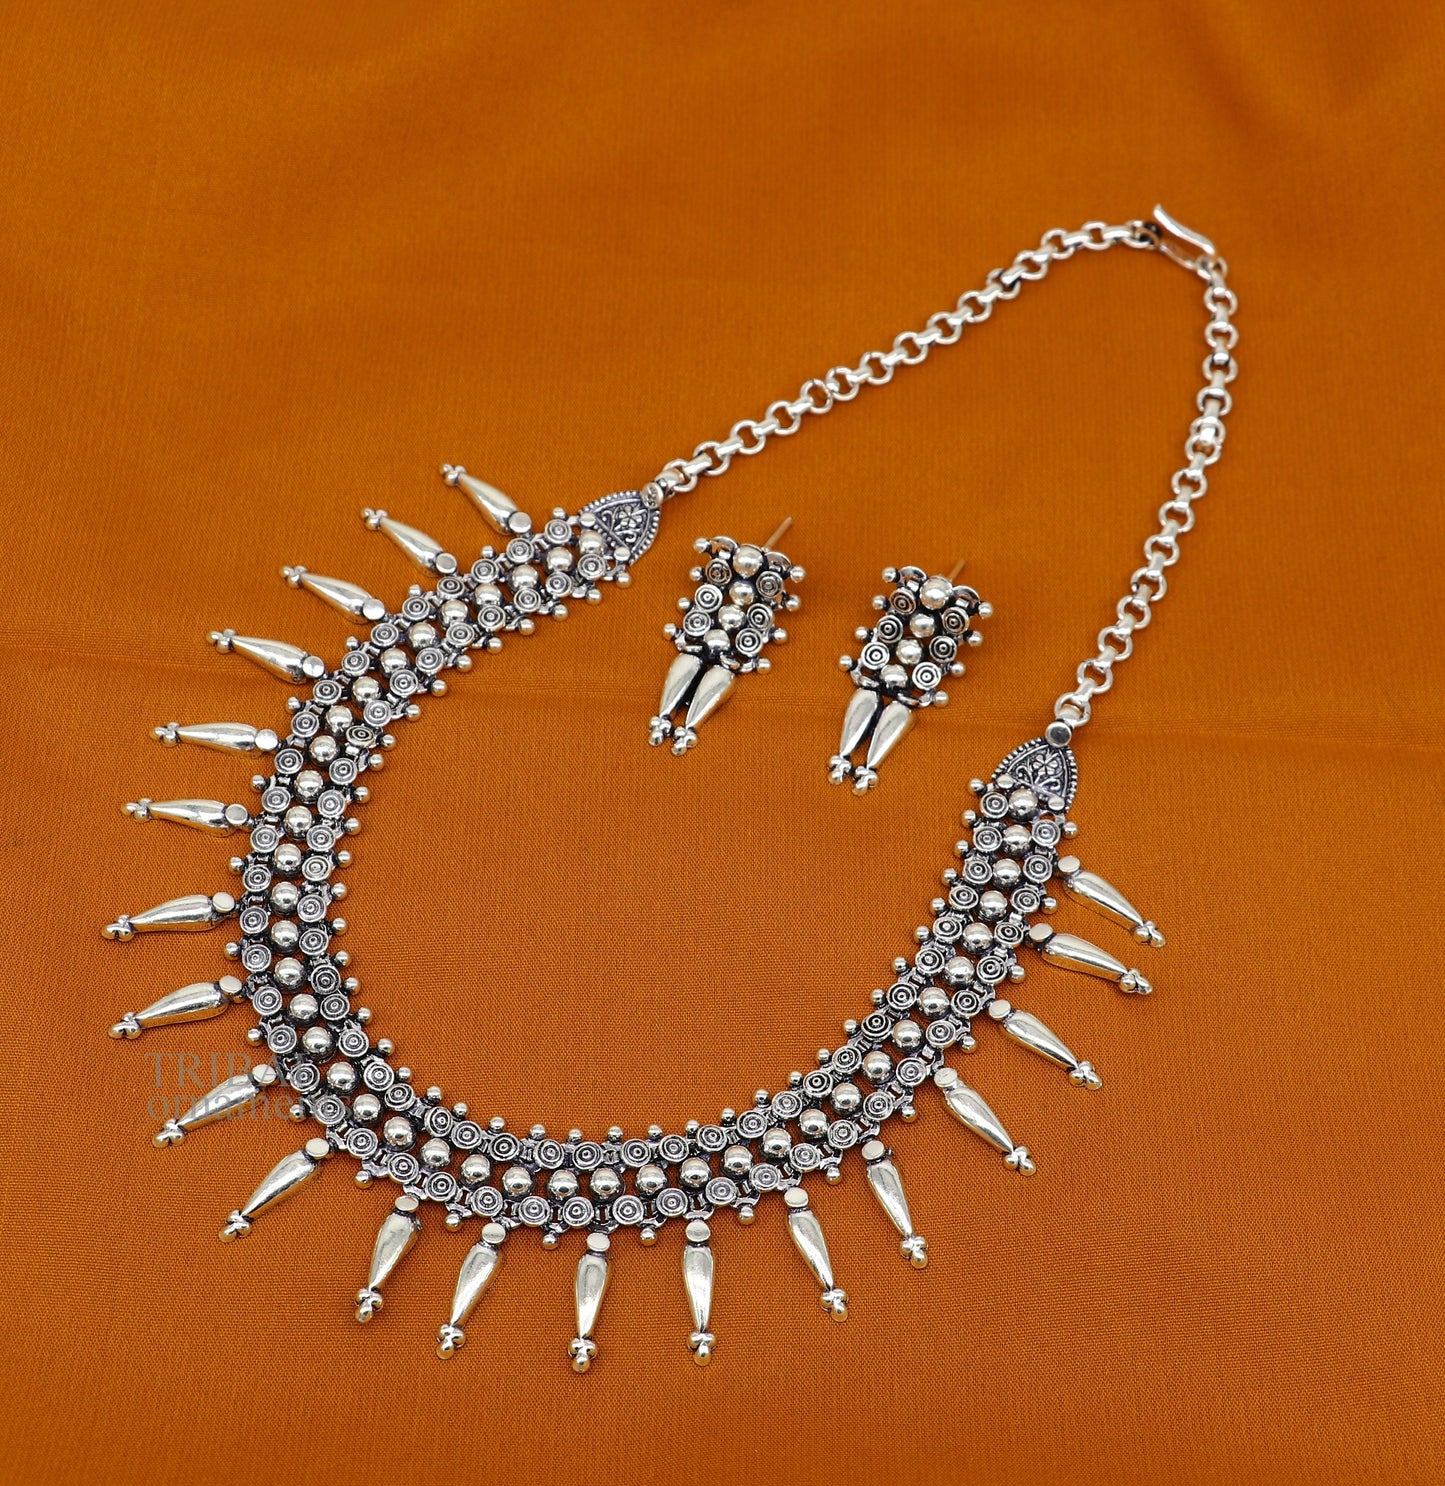 925 sterling silver handcrafted vintage design ethnic necklace, excellent wedding gifting tribal brides belly dance jewelry india nec287 - TRIBAL ORNAMENTS